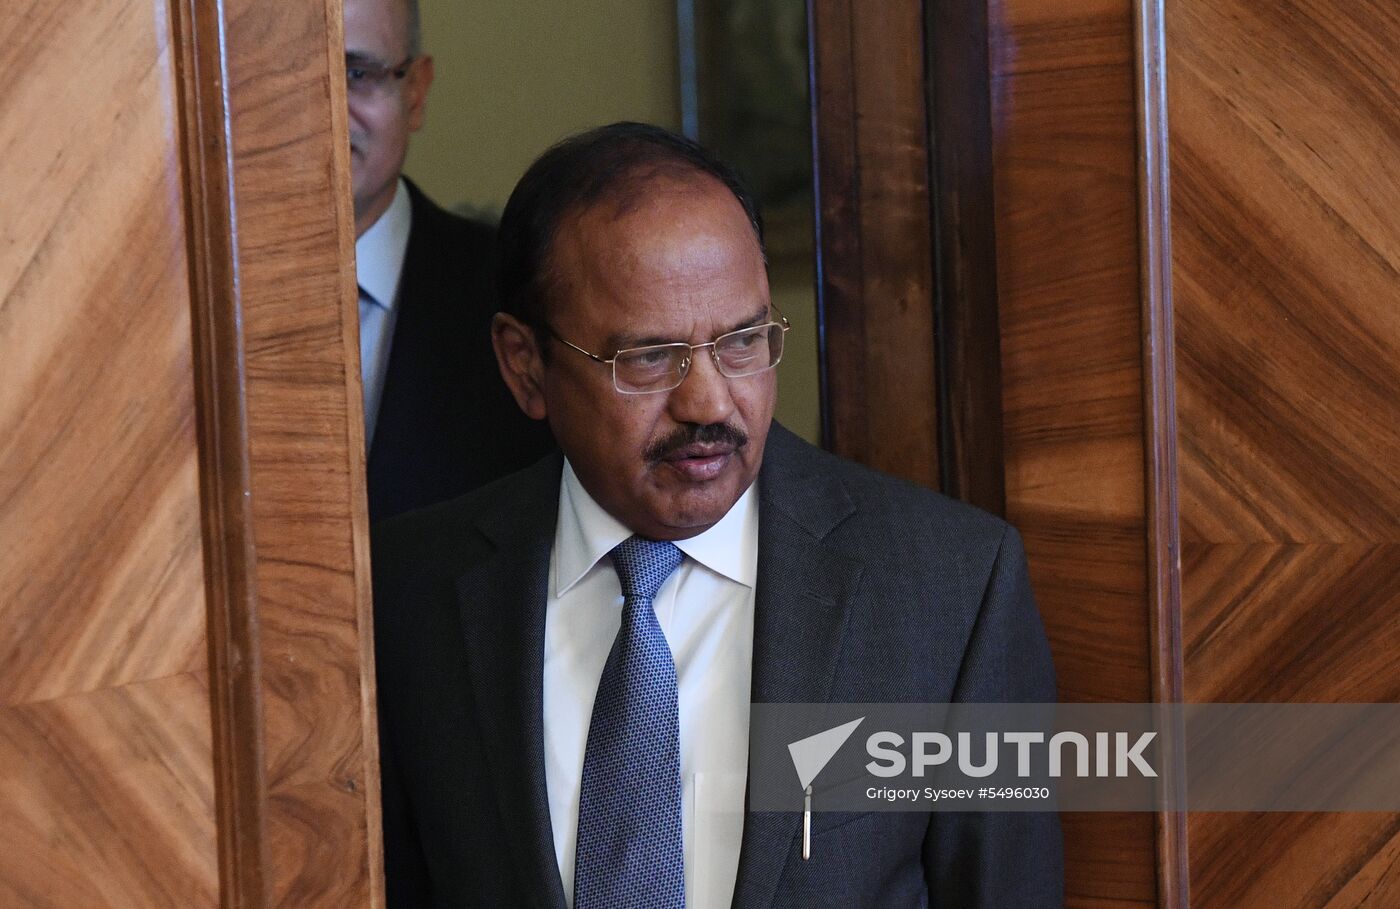 Russian Foreign Minister Lavrov meets with India's National Security Advisor Ajit Doval